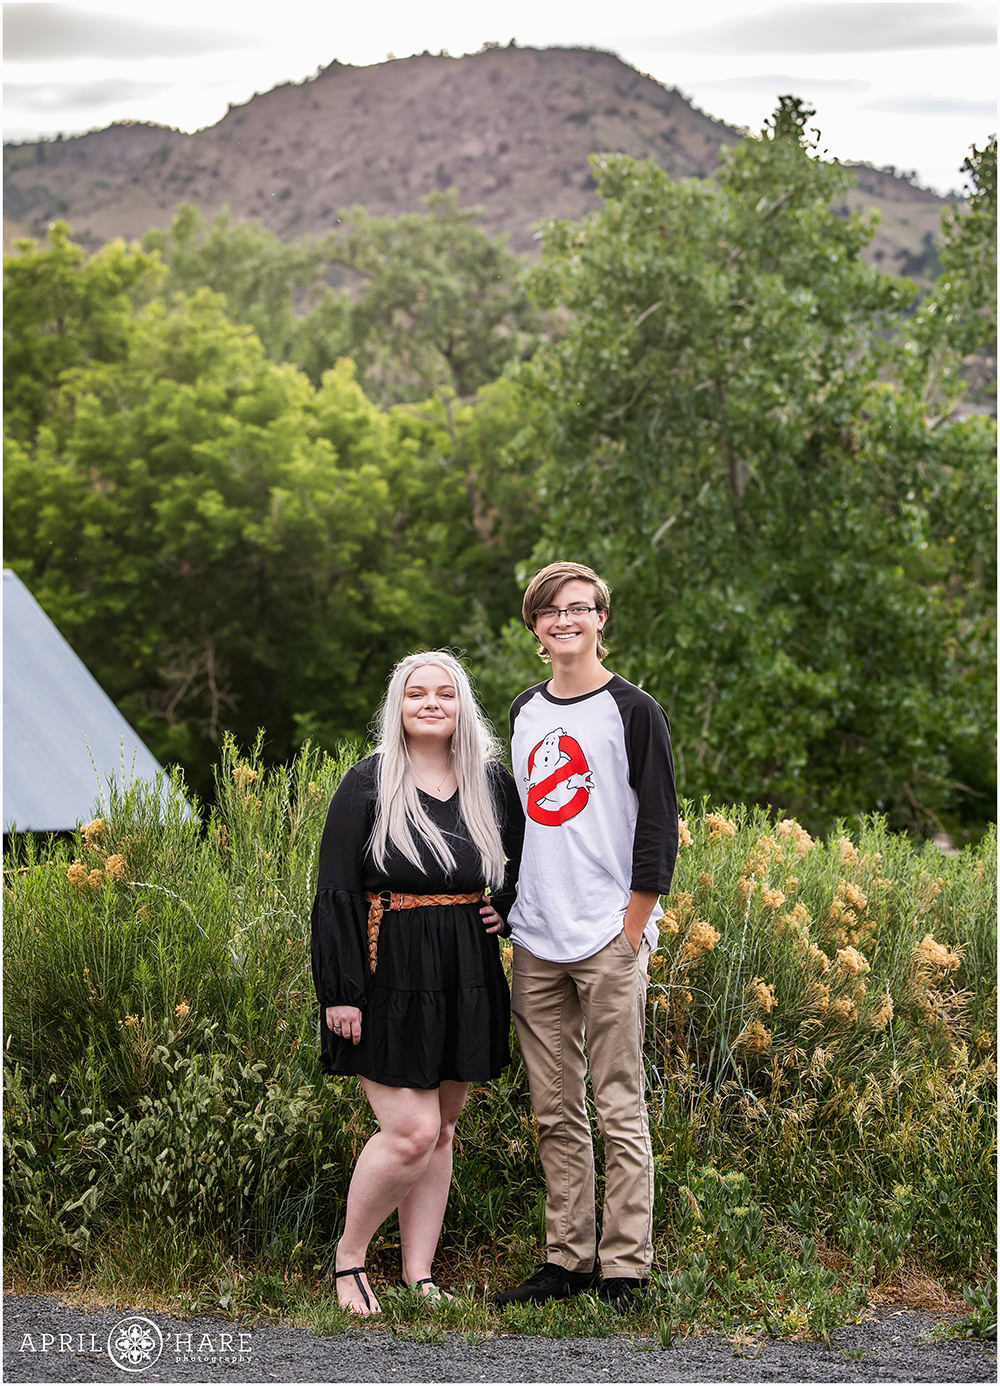 Step siblings pose for a photo together at their blended family photography session in Golden Colorado